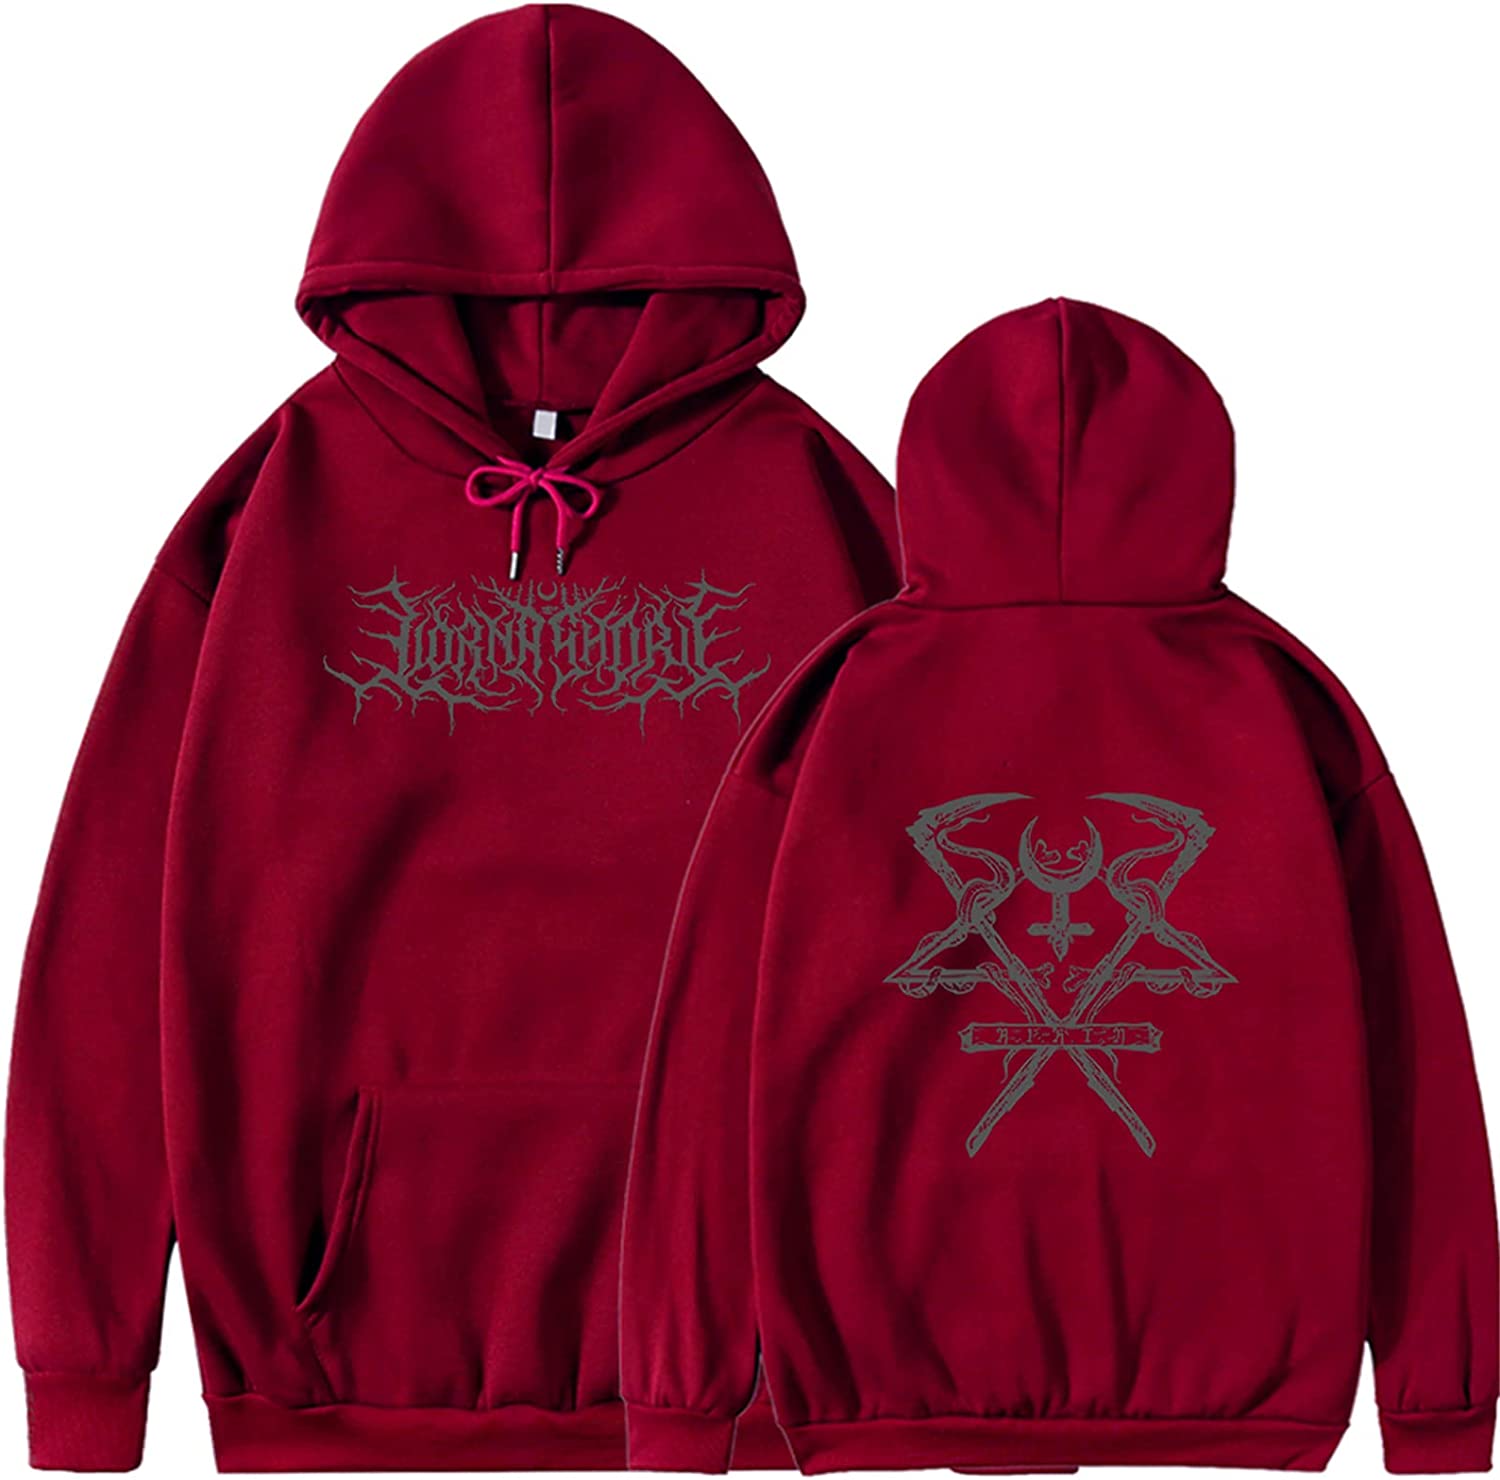 Lorna Shore Hoodies – Logo Printed Front Pullover Colorful Hoodie 4 - Lorna Shore Store